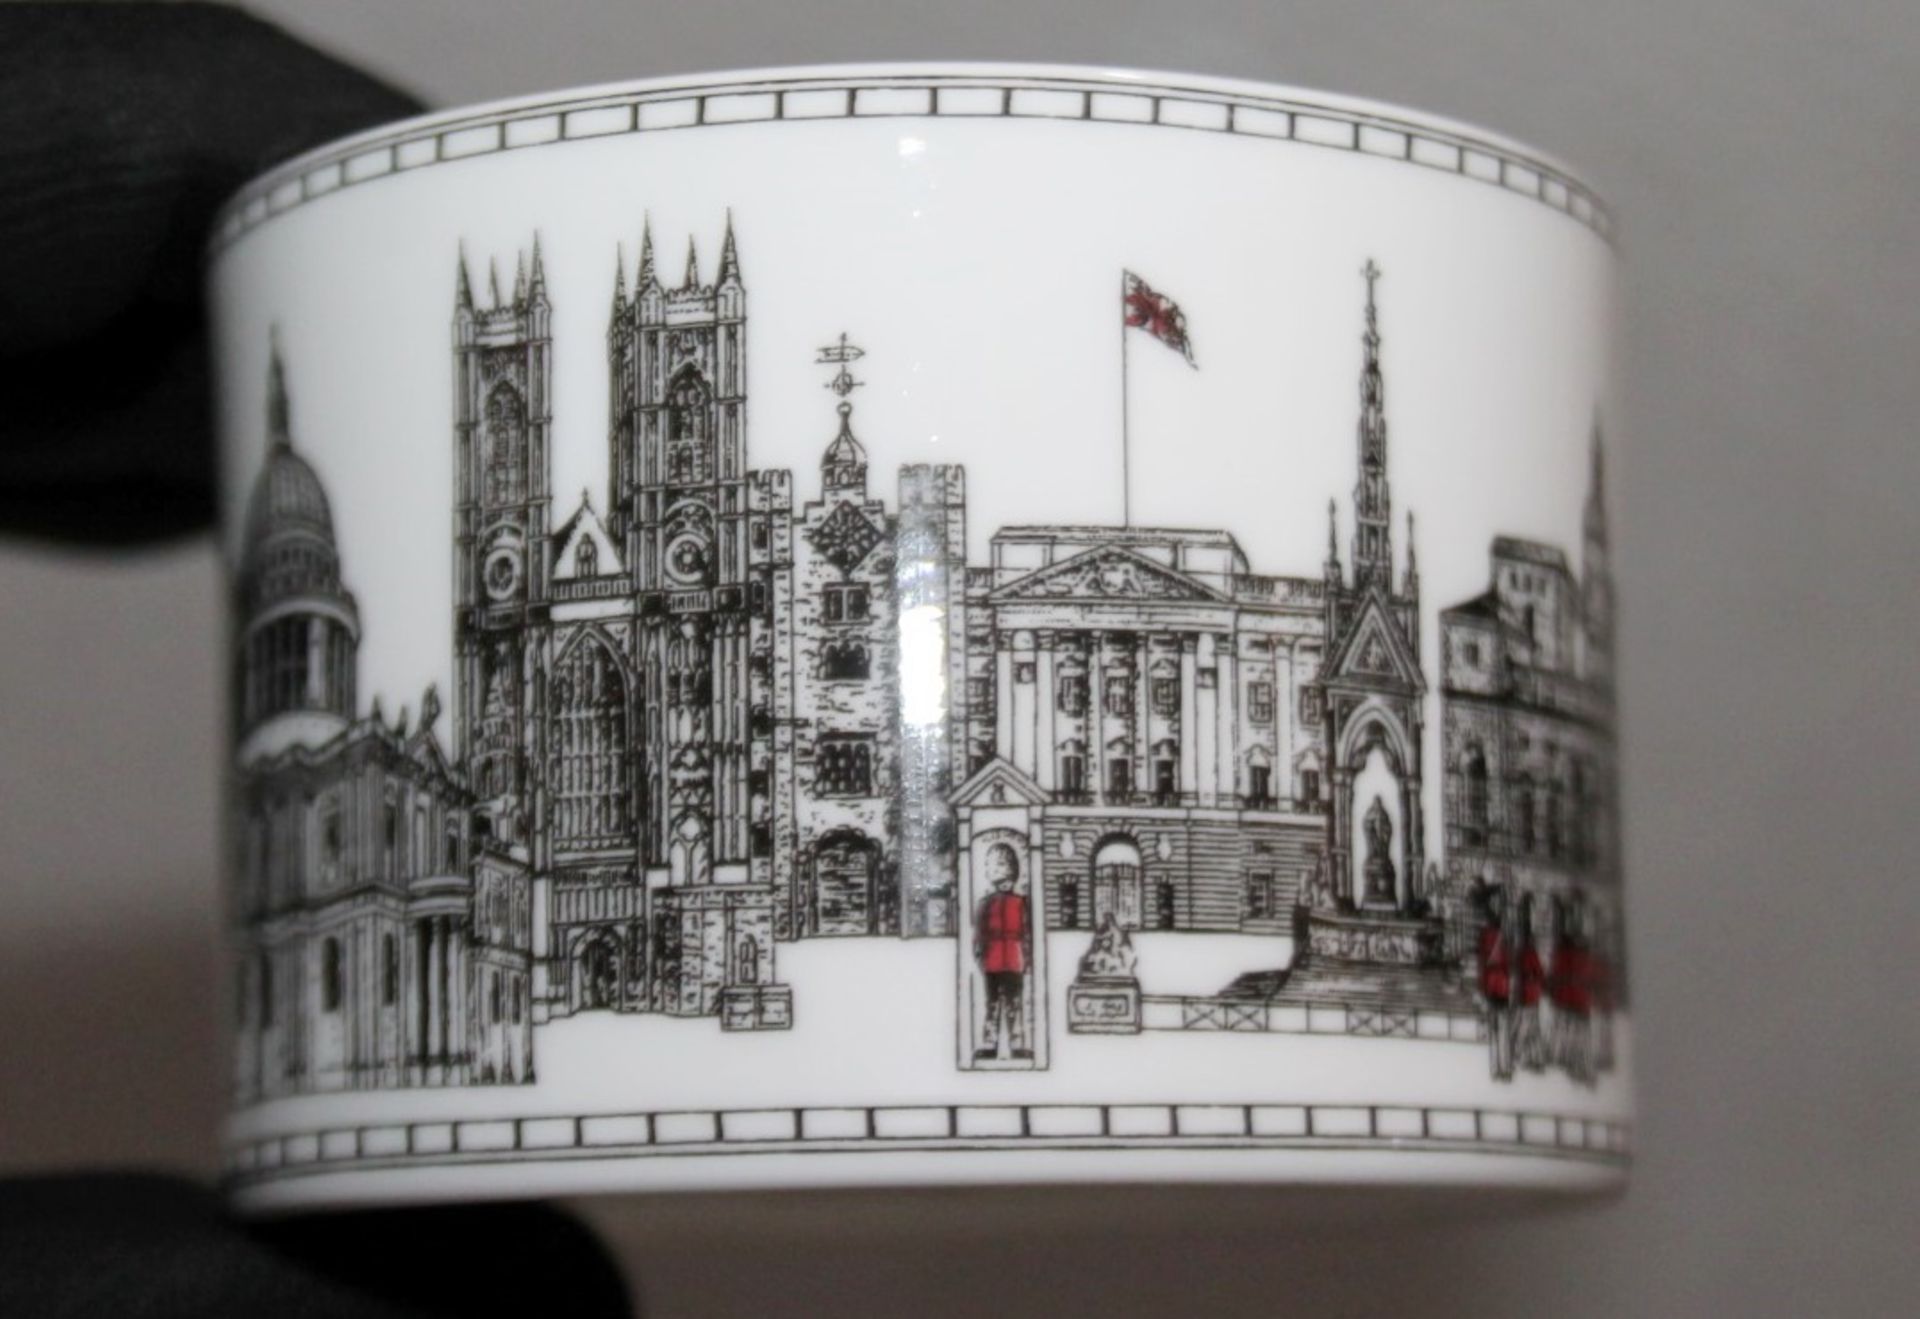 1 x HALCYON DAYS 'London Icons' Bone China Teacup & Saucer - Original Price £79.95 - Read Condition - Image 8 of 10